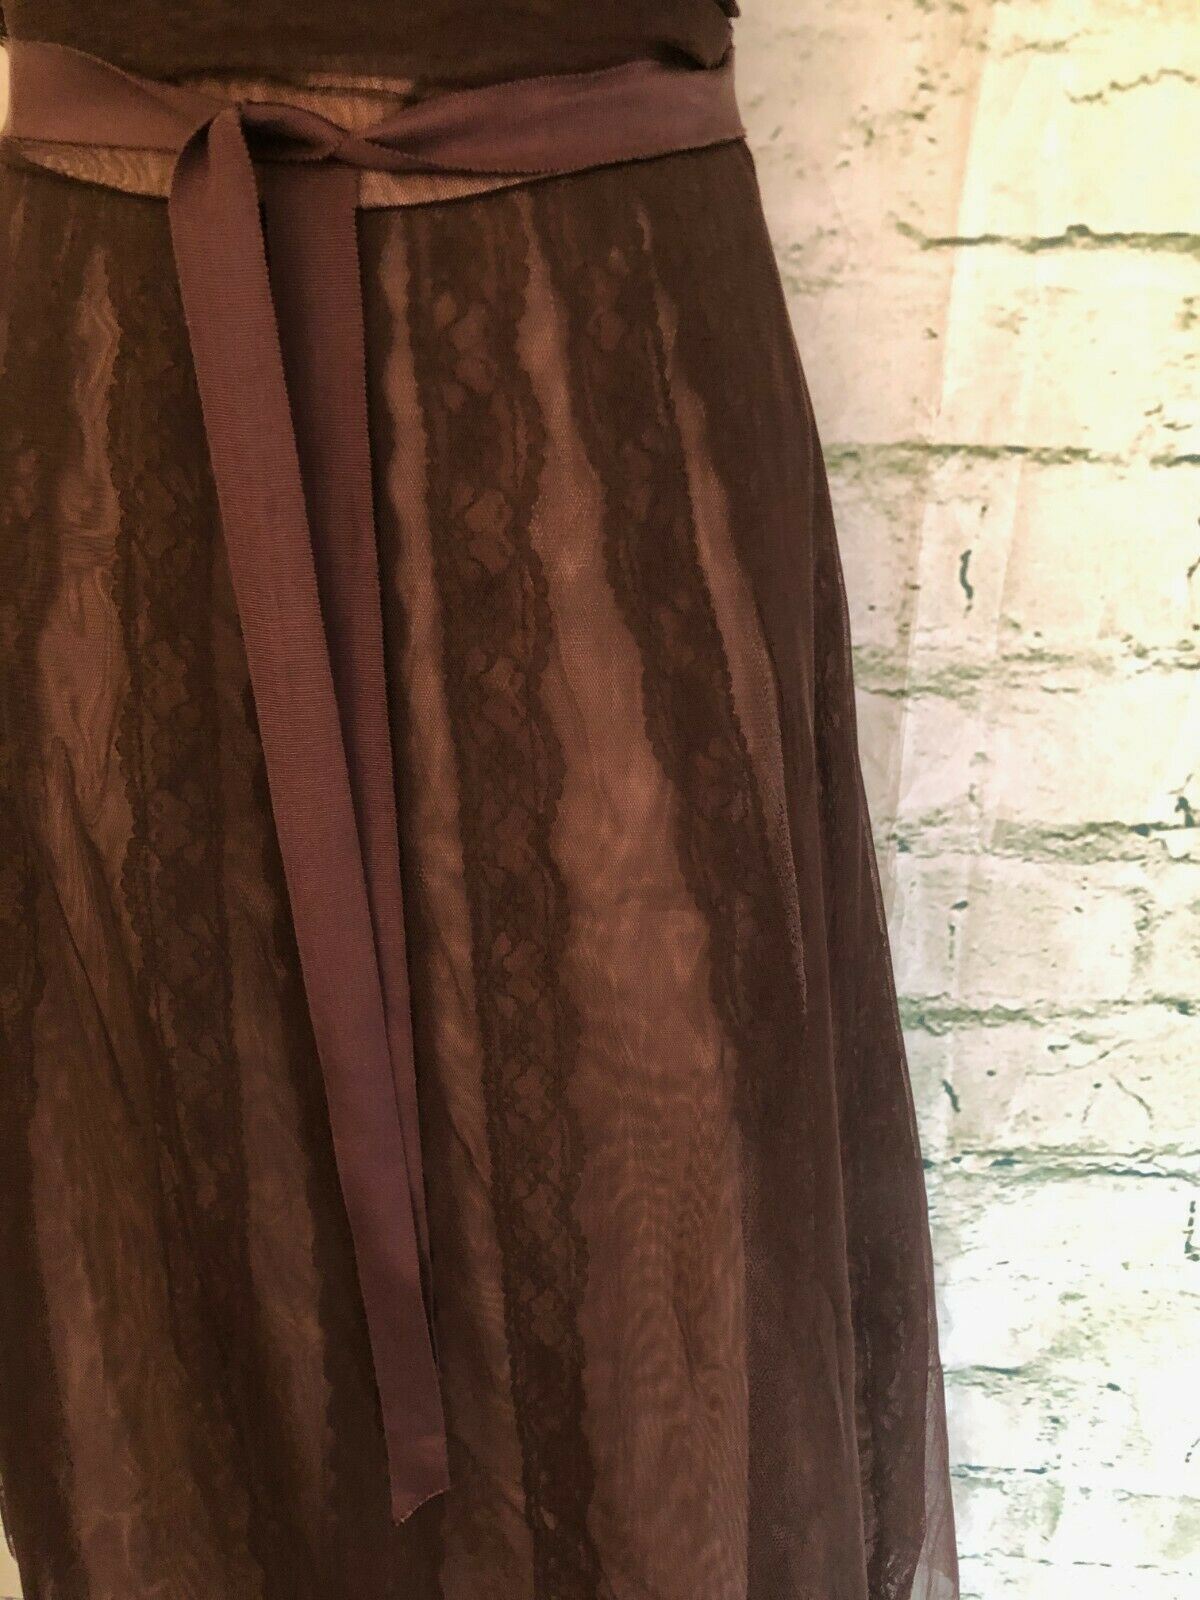 BCBG MAXAZRIA Brown Tulle Fit & Flare Strapless Cocktail Dress UK 10 US 6 EU 38 Timeless Fashions